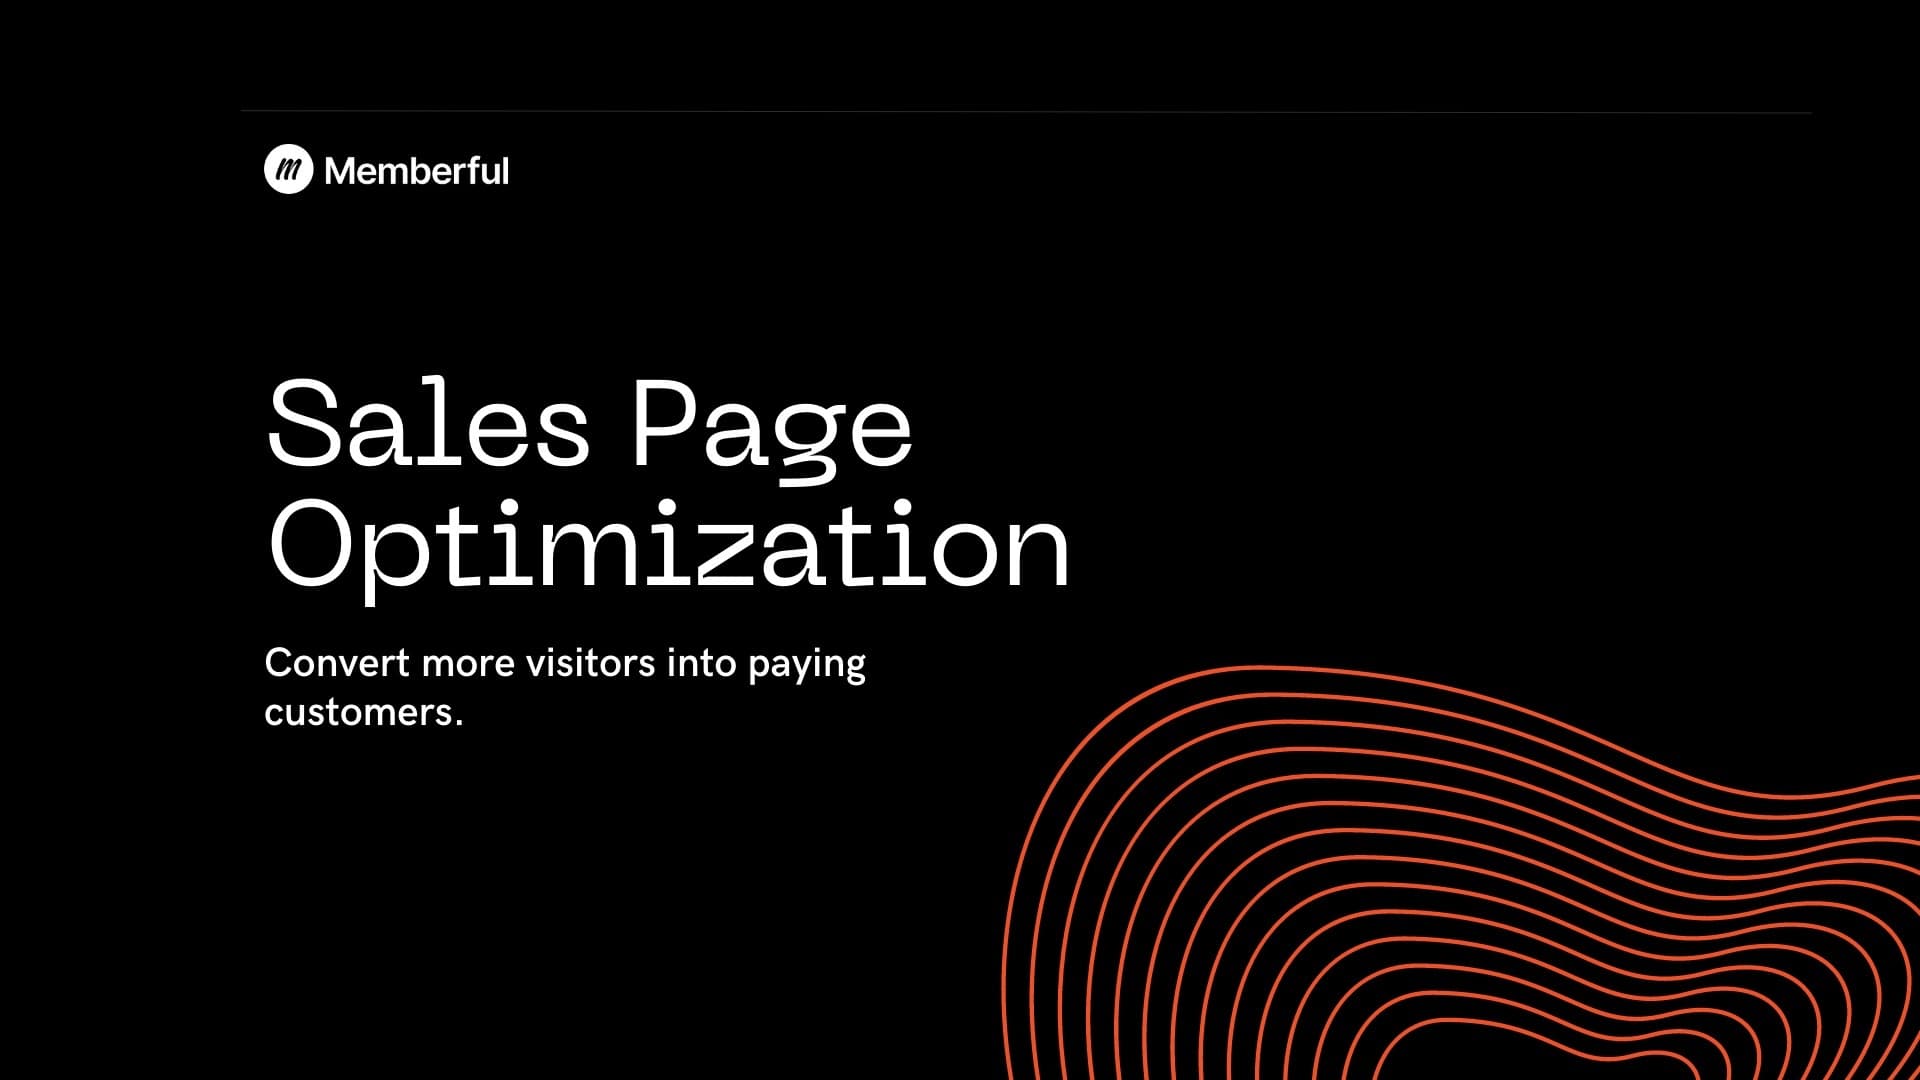 Optimizing your sales page